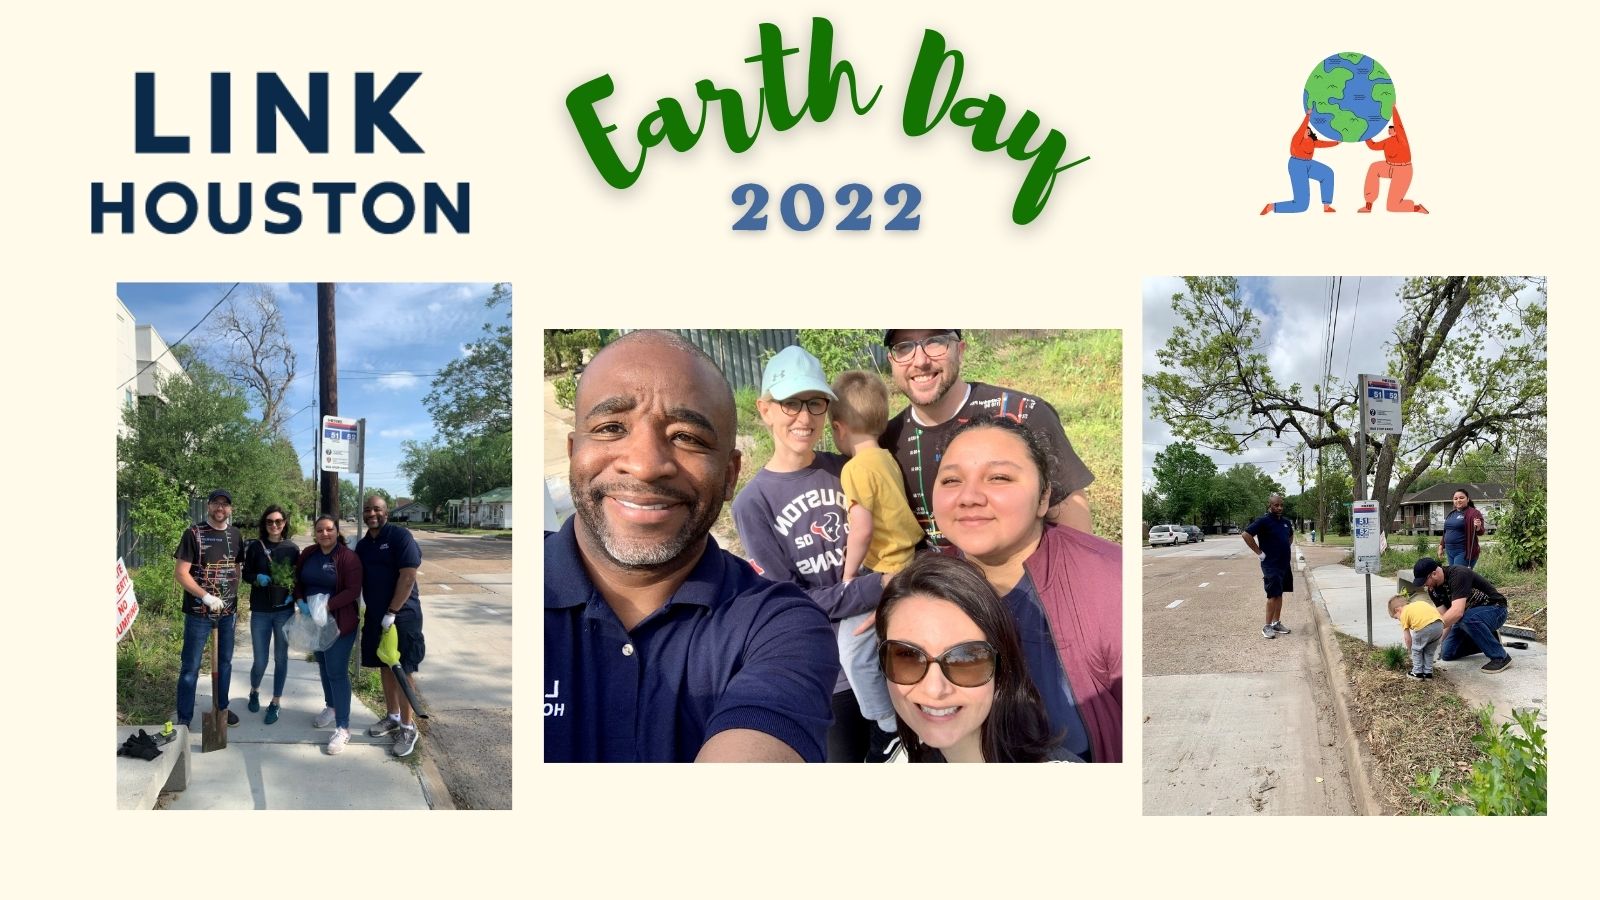 LINK Houston Logo. Earth Day 2022. Two people holding the Earth. Three images: Image 1: LINK Houston team Jonathan Brooks, Ines Sigel, Mara Gomez, and Ashley Johnson at the 51/52 routes bus stop in Near Northside with plants and gardening tools. Image 2: Ashley Johnson, Jessica Brooks, Jonathan Brooks and their three-year old son, Mara Gomez and Ines Sigel. Image 3: Ashley Johnson stands by the bus stop sign as Jonathan and his son plant a small shrub. Mara Gomez stands behind them.